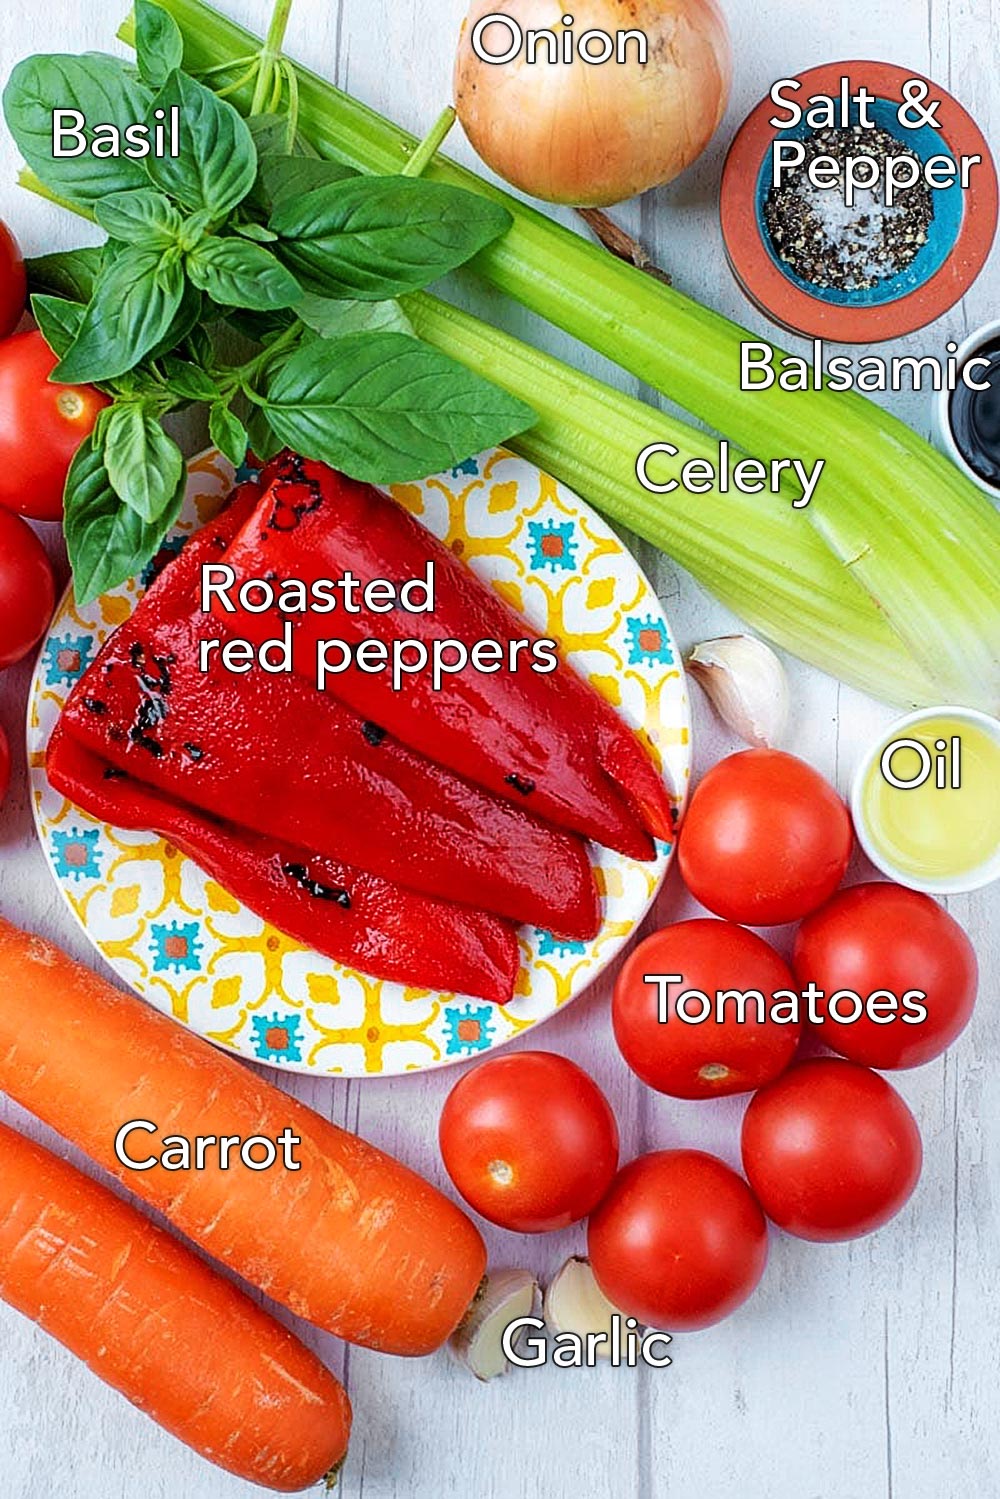 A plate of roasted red peppers surrounded by carrots, tomatoes, celery, basil, garlic and an onion.